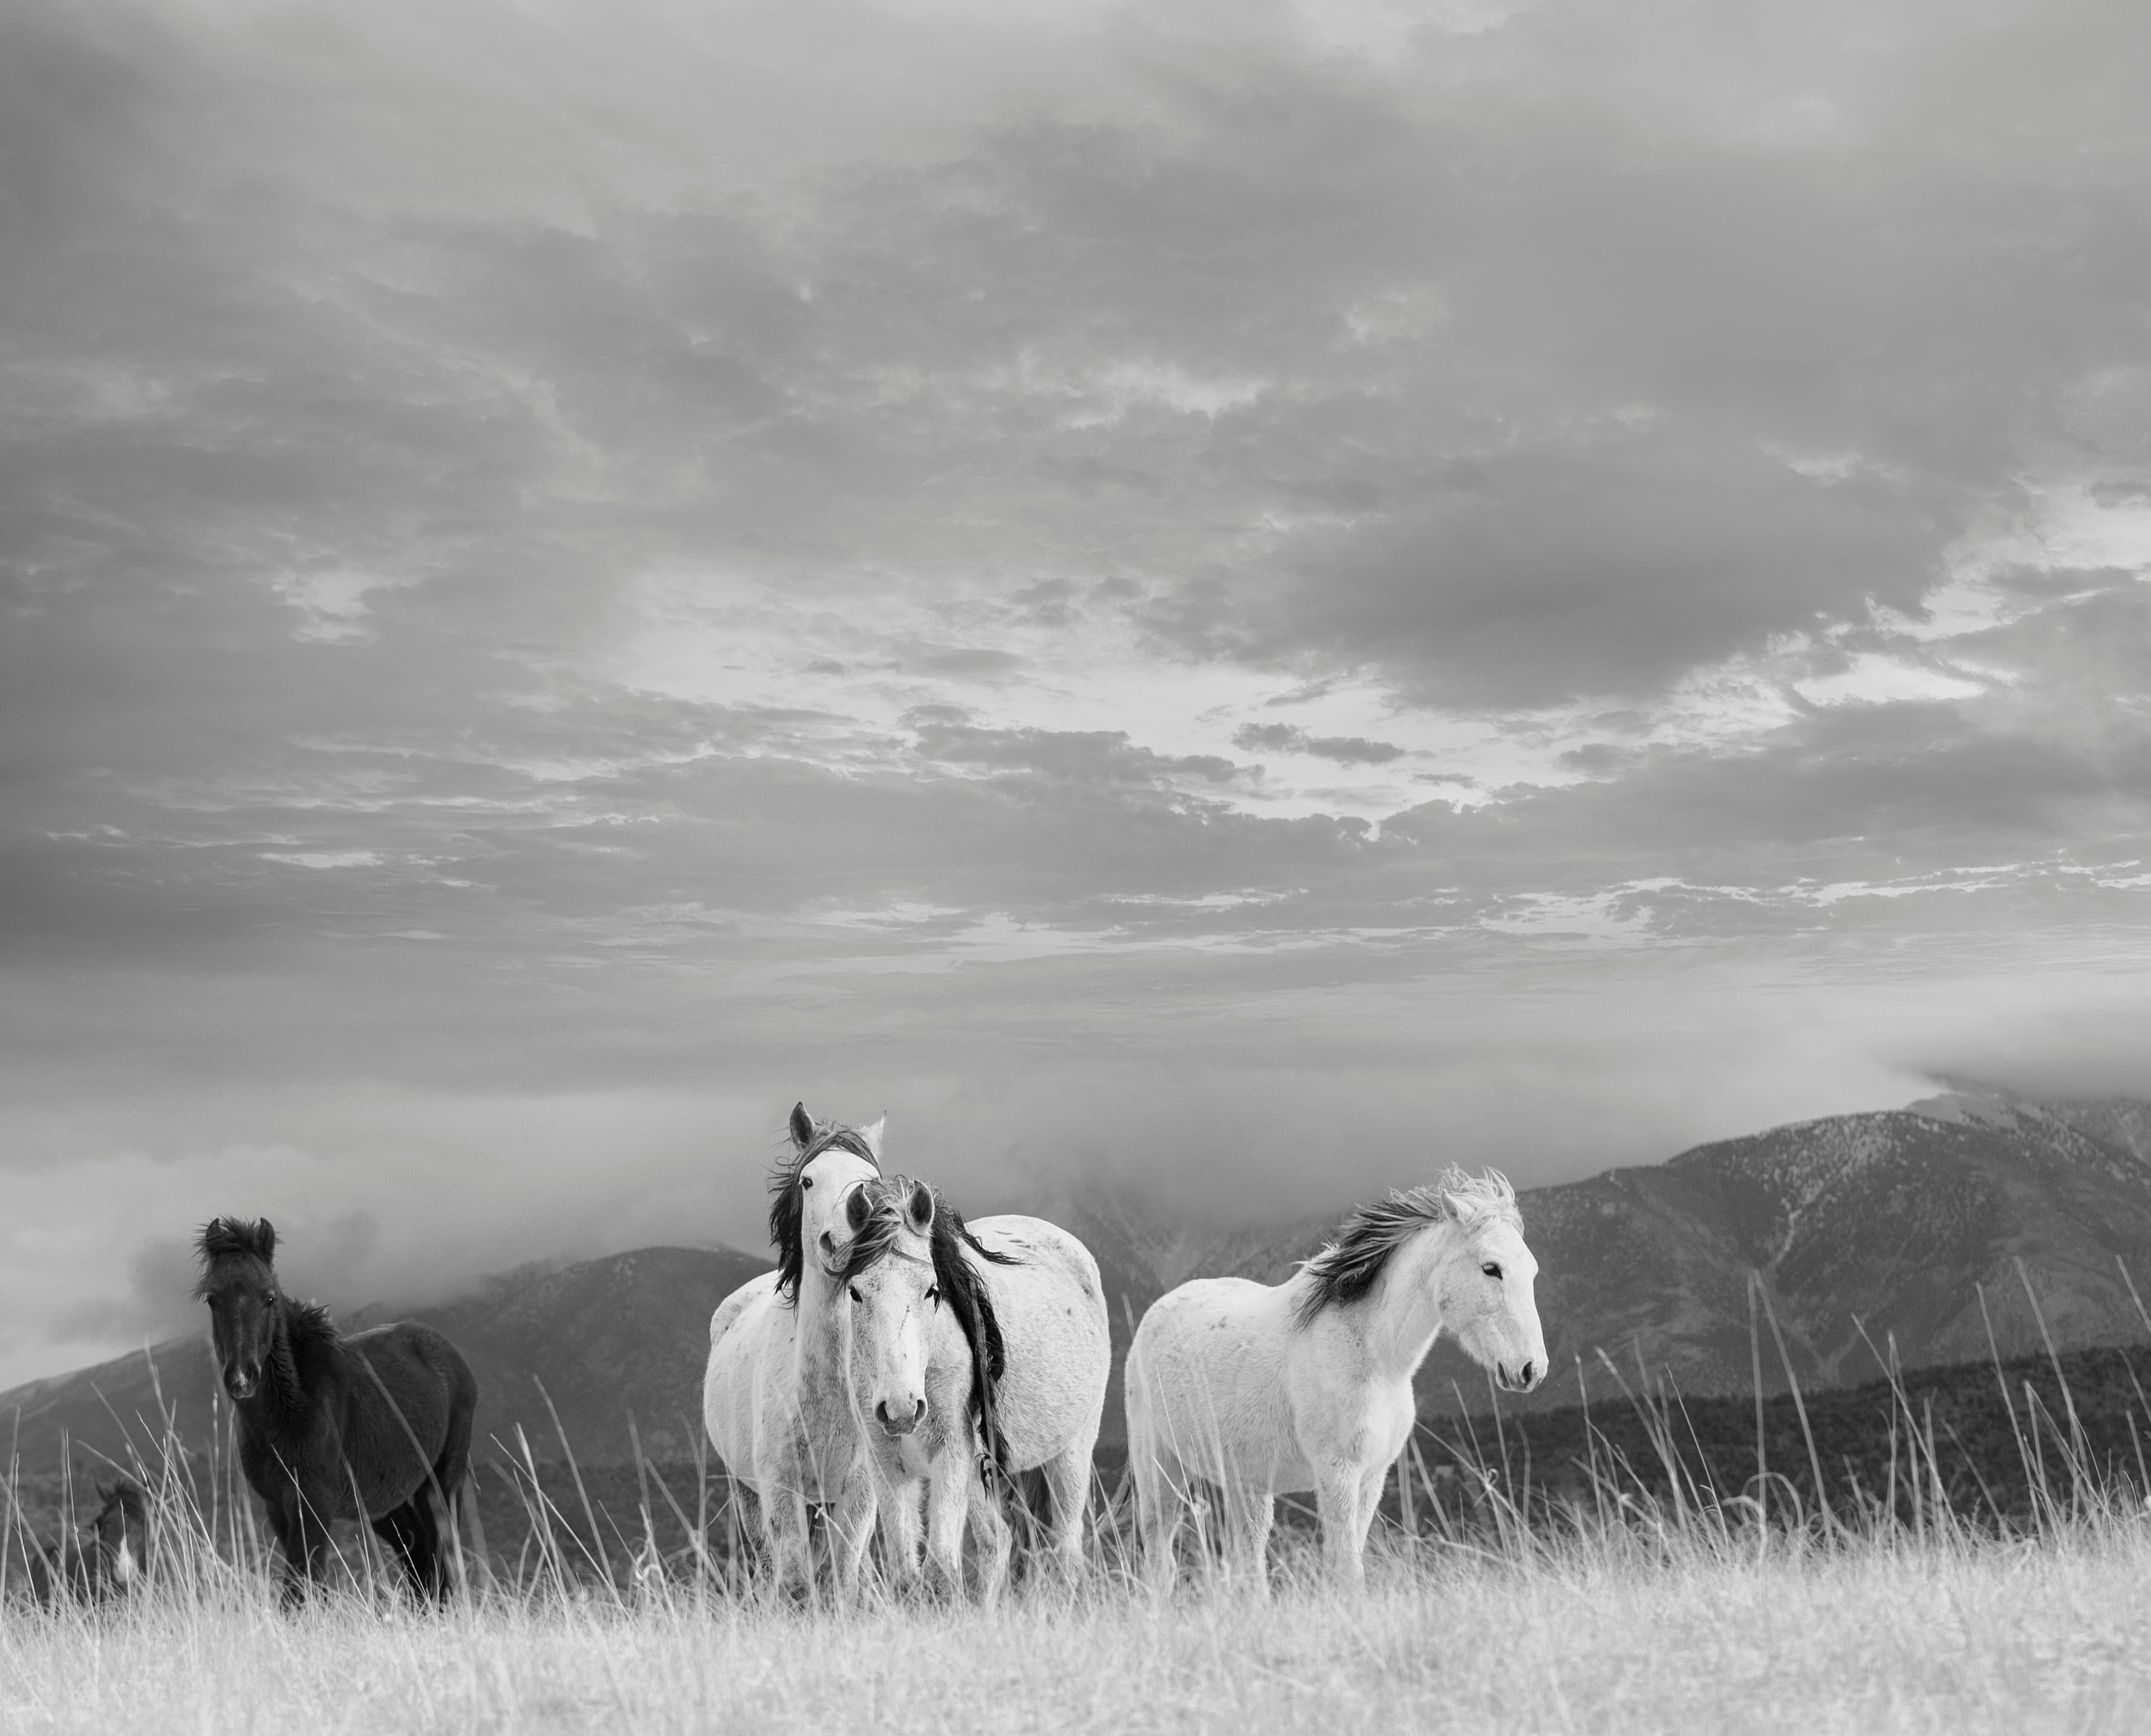 Shane Russeck Animal Print - White Mountain Mustangs 36x48 -Black and White Photography  Wild Horses Mustangs